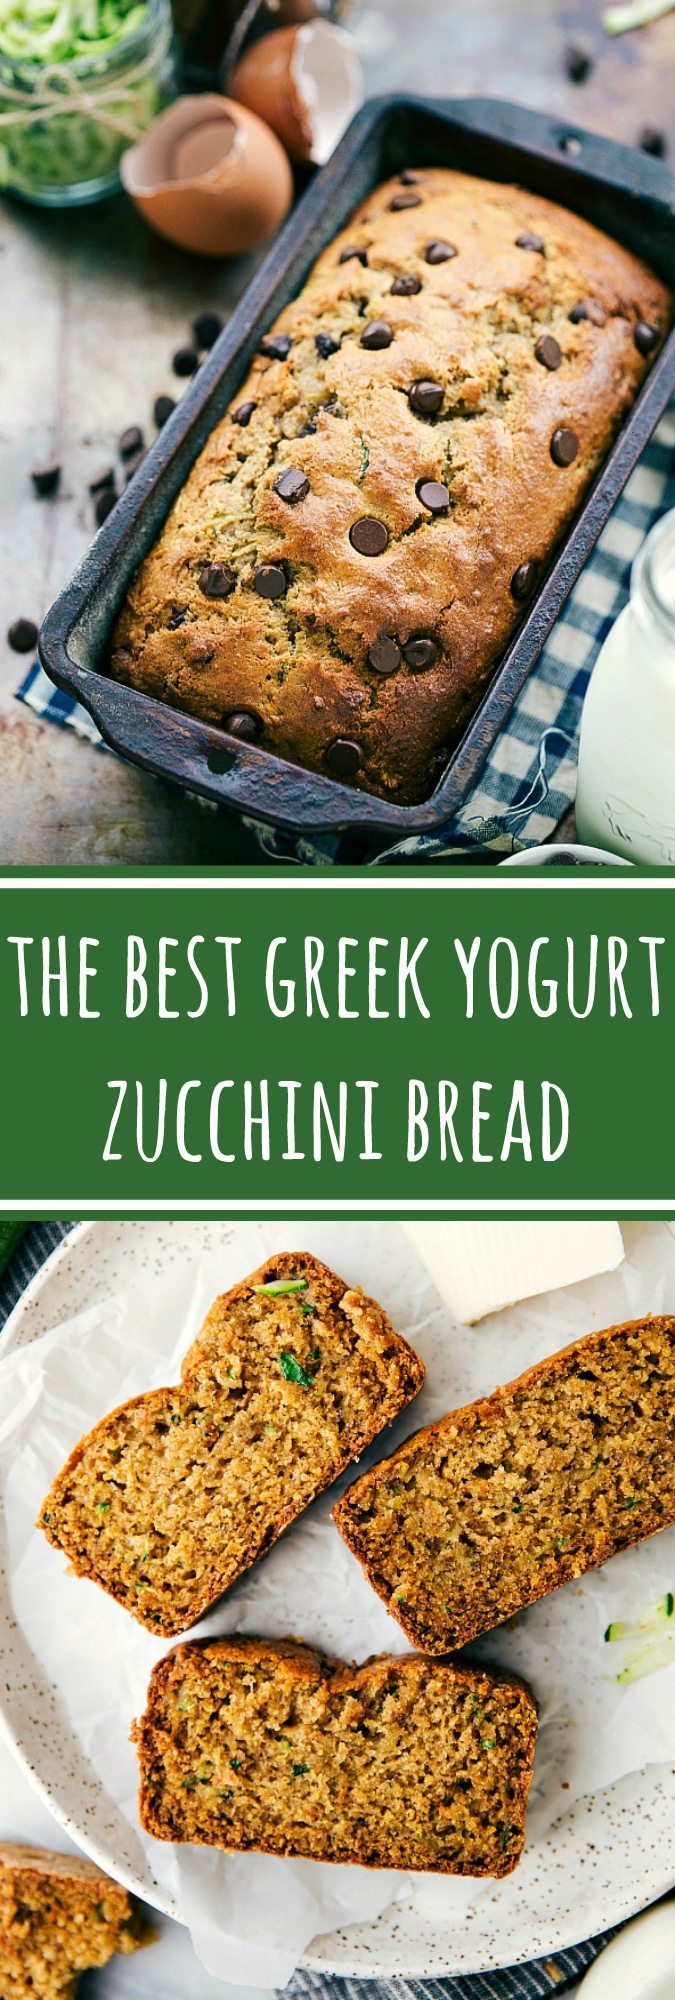 With or without chocolate chips, this Greek yogurt healthy zucchini bread is the BEST! Rave reviews from many!